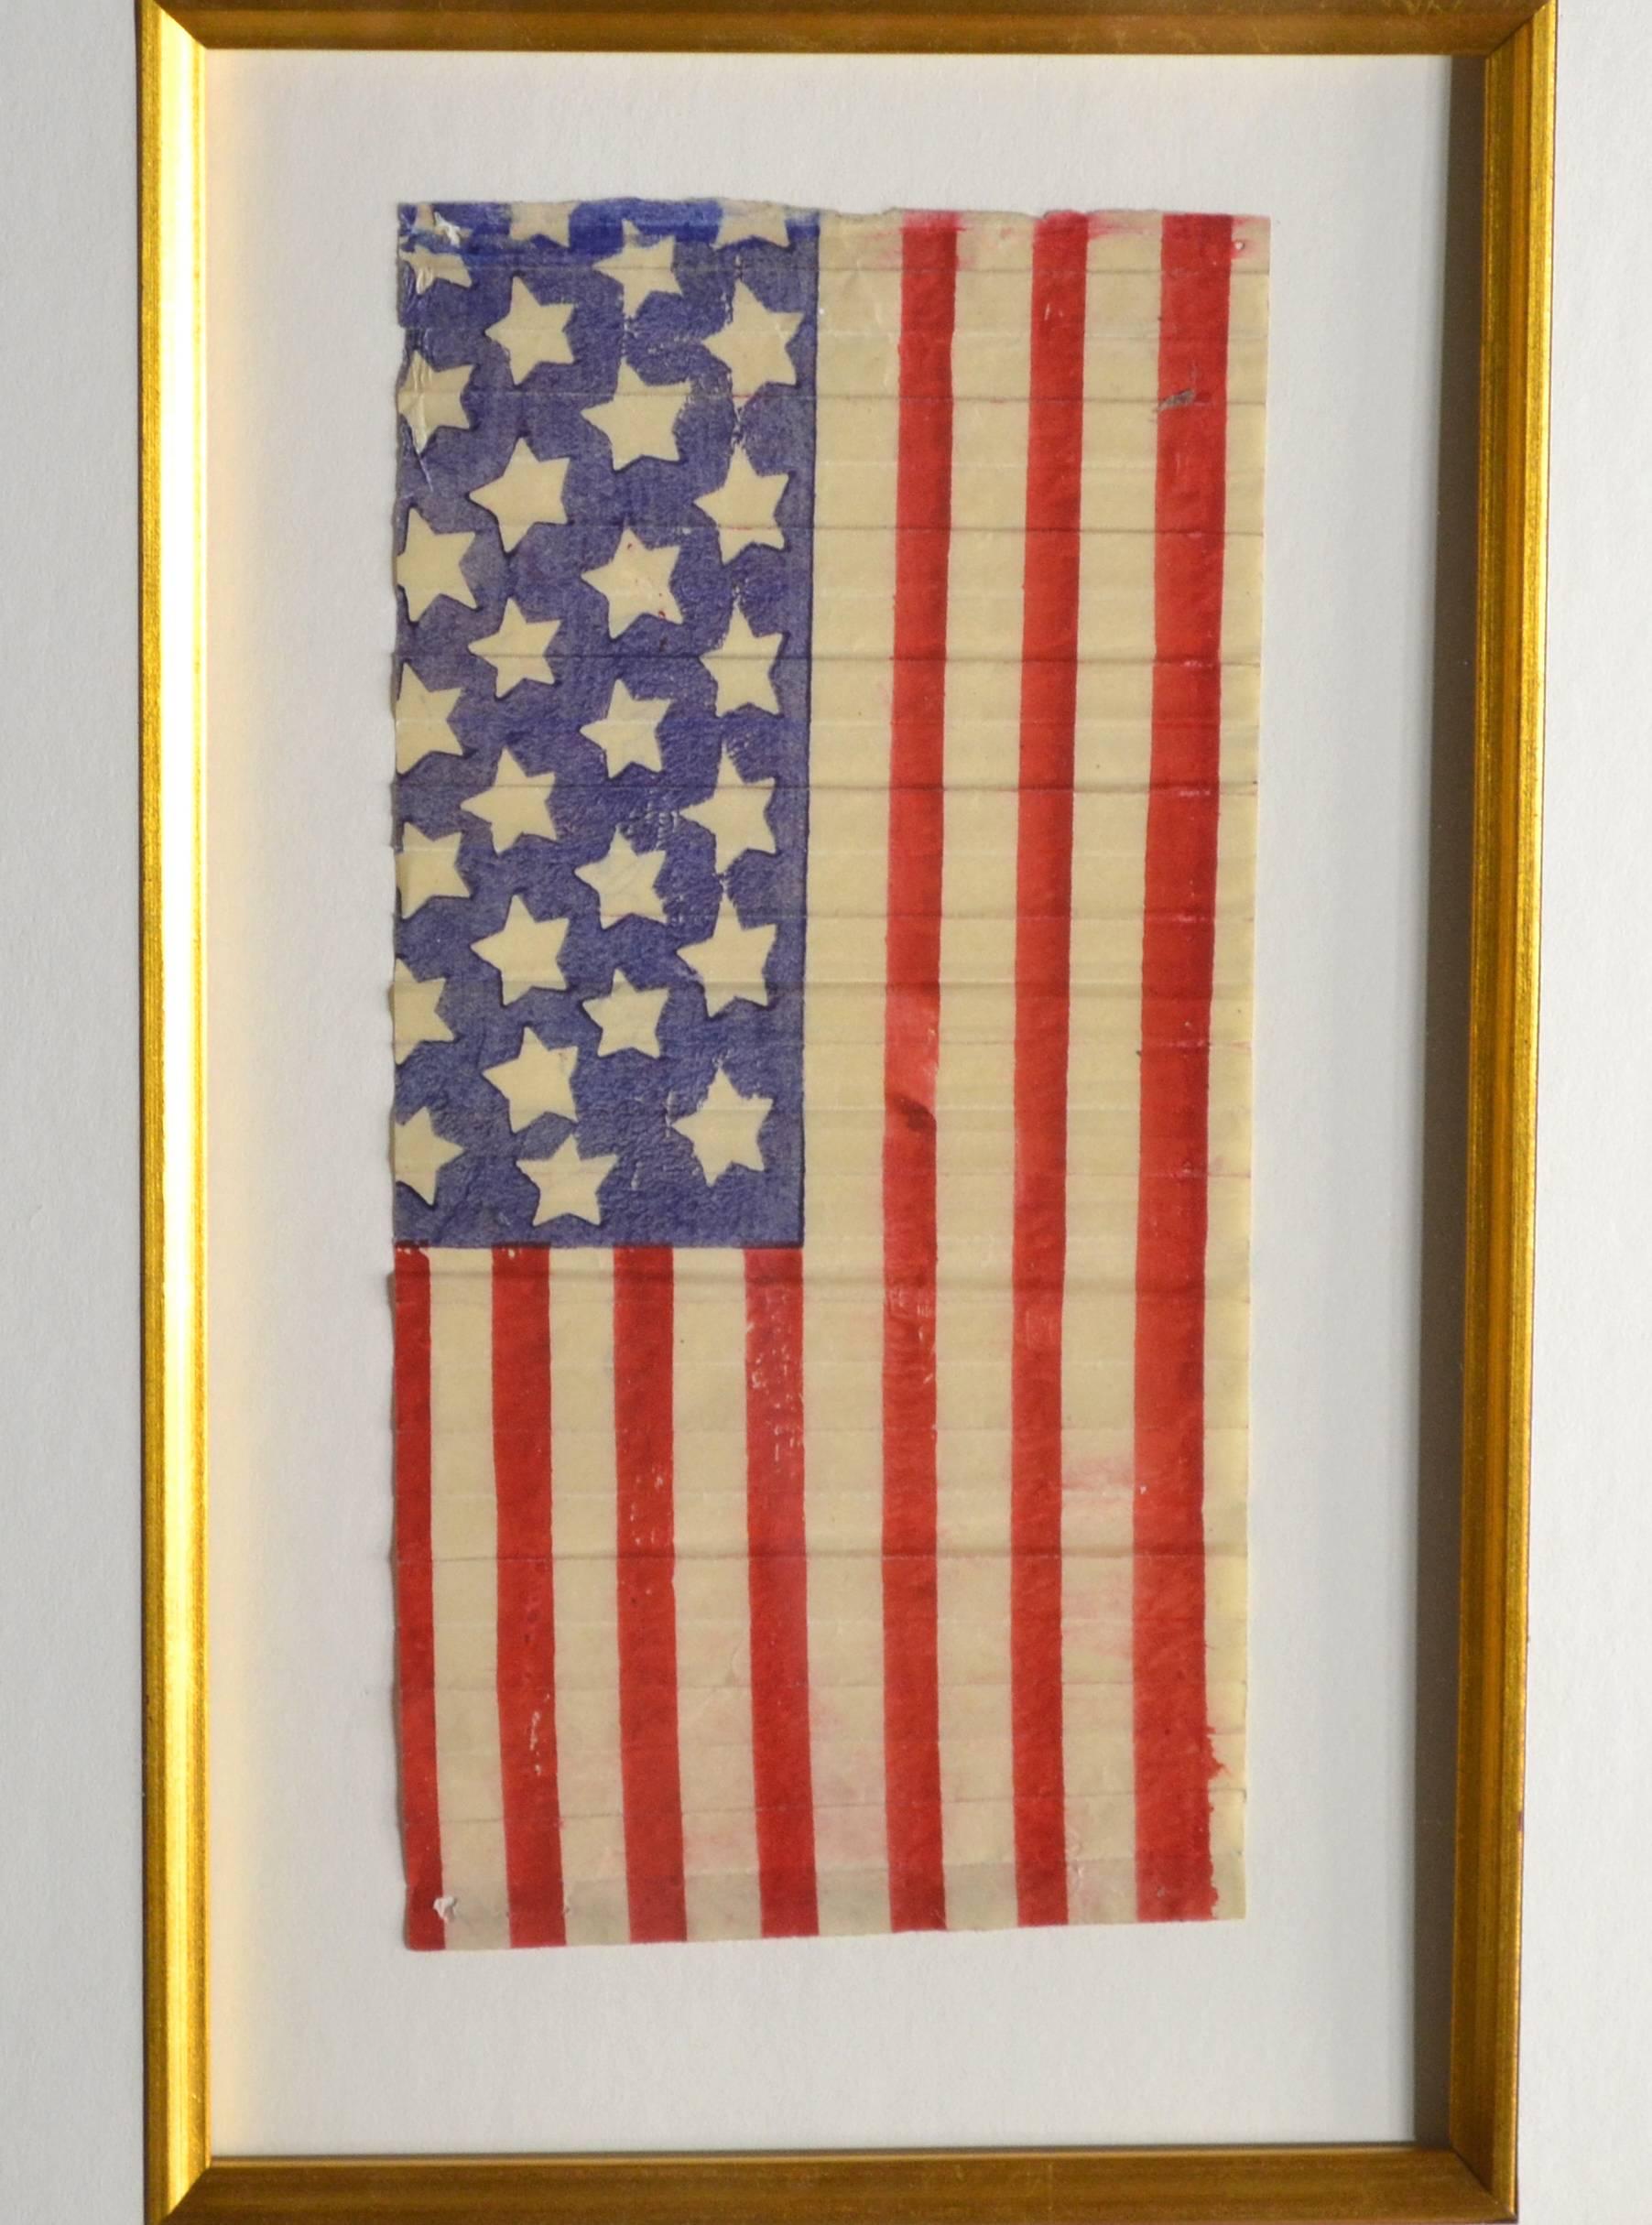 Rare find, a 28 star flag made to celebrate the entry of Texas into the Union on December 29, 1845. President James K. Polk welcomed Texas into the United States. It’s a miracle this flag has survived 172 years as its made of paper. It was probably